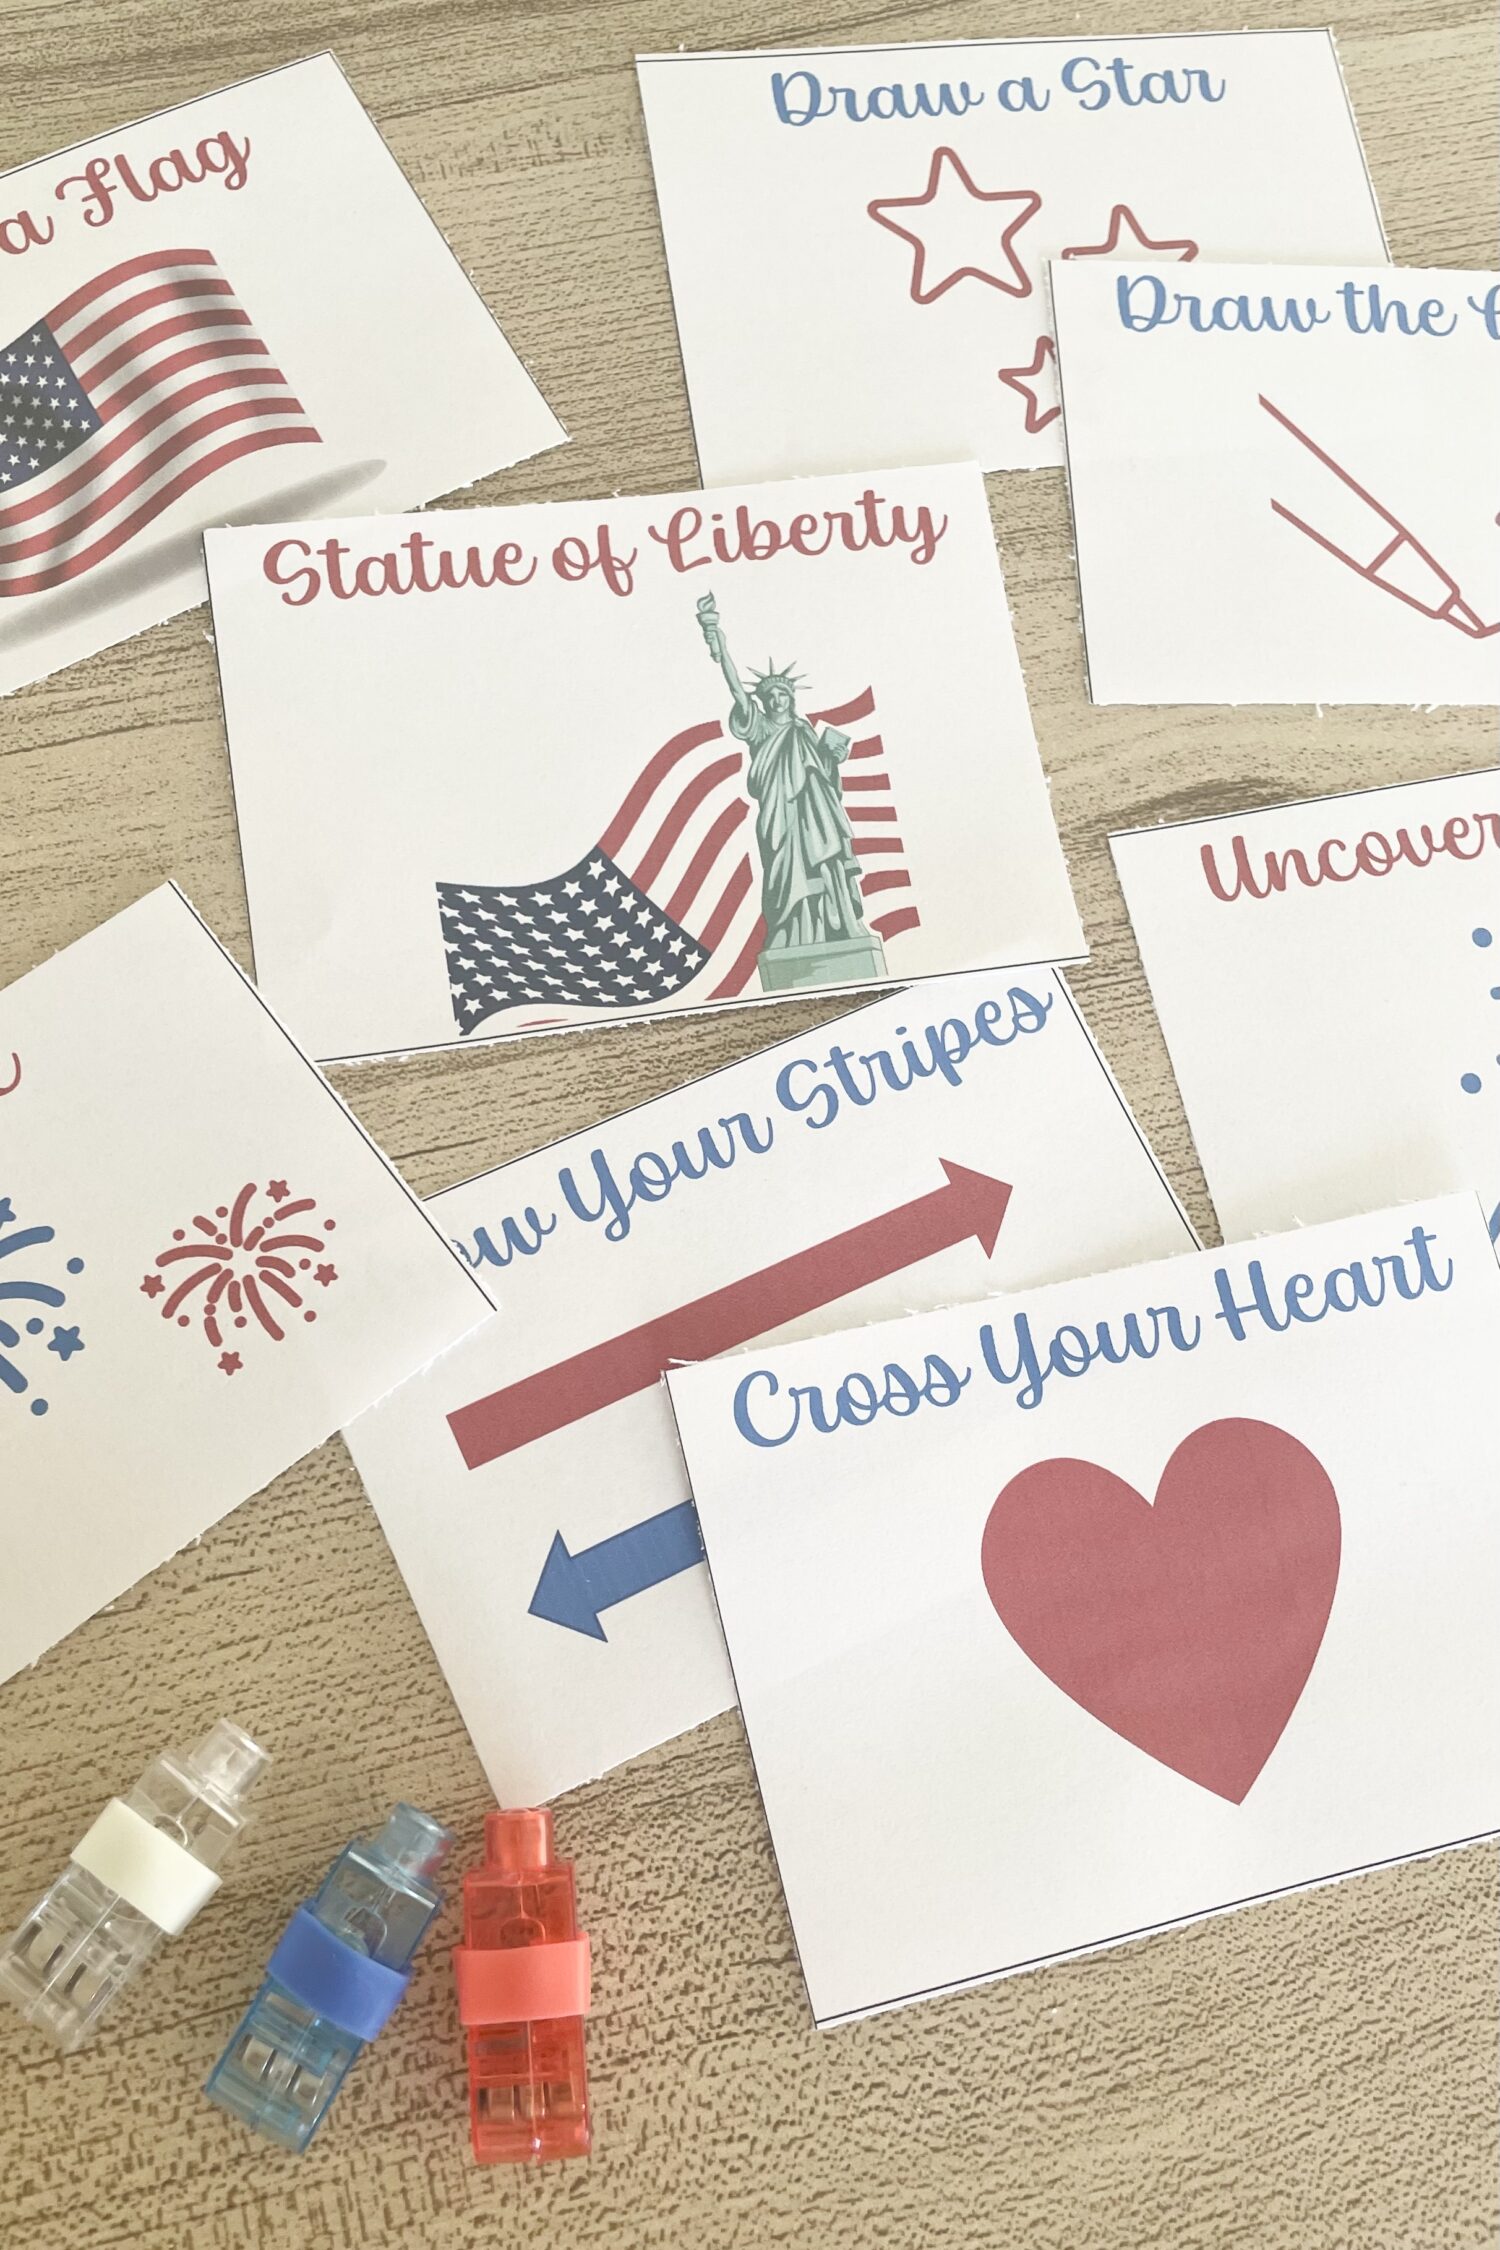 4th of July Patriotic Finger Lights - Use these fun and festive finger lights actions for 4th of July with printable action cards for LDS Primary Music Leaders.